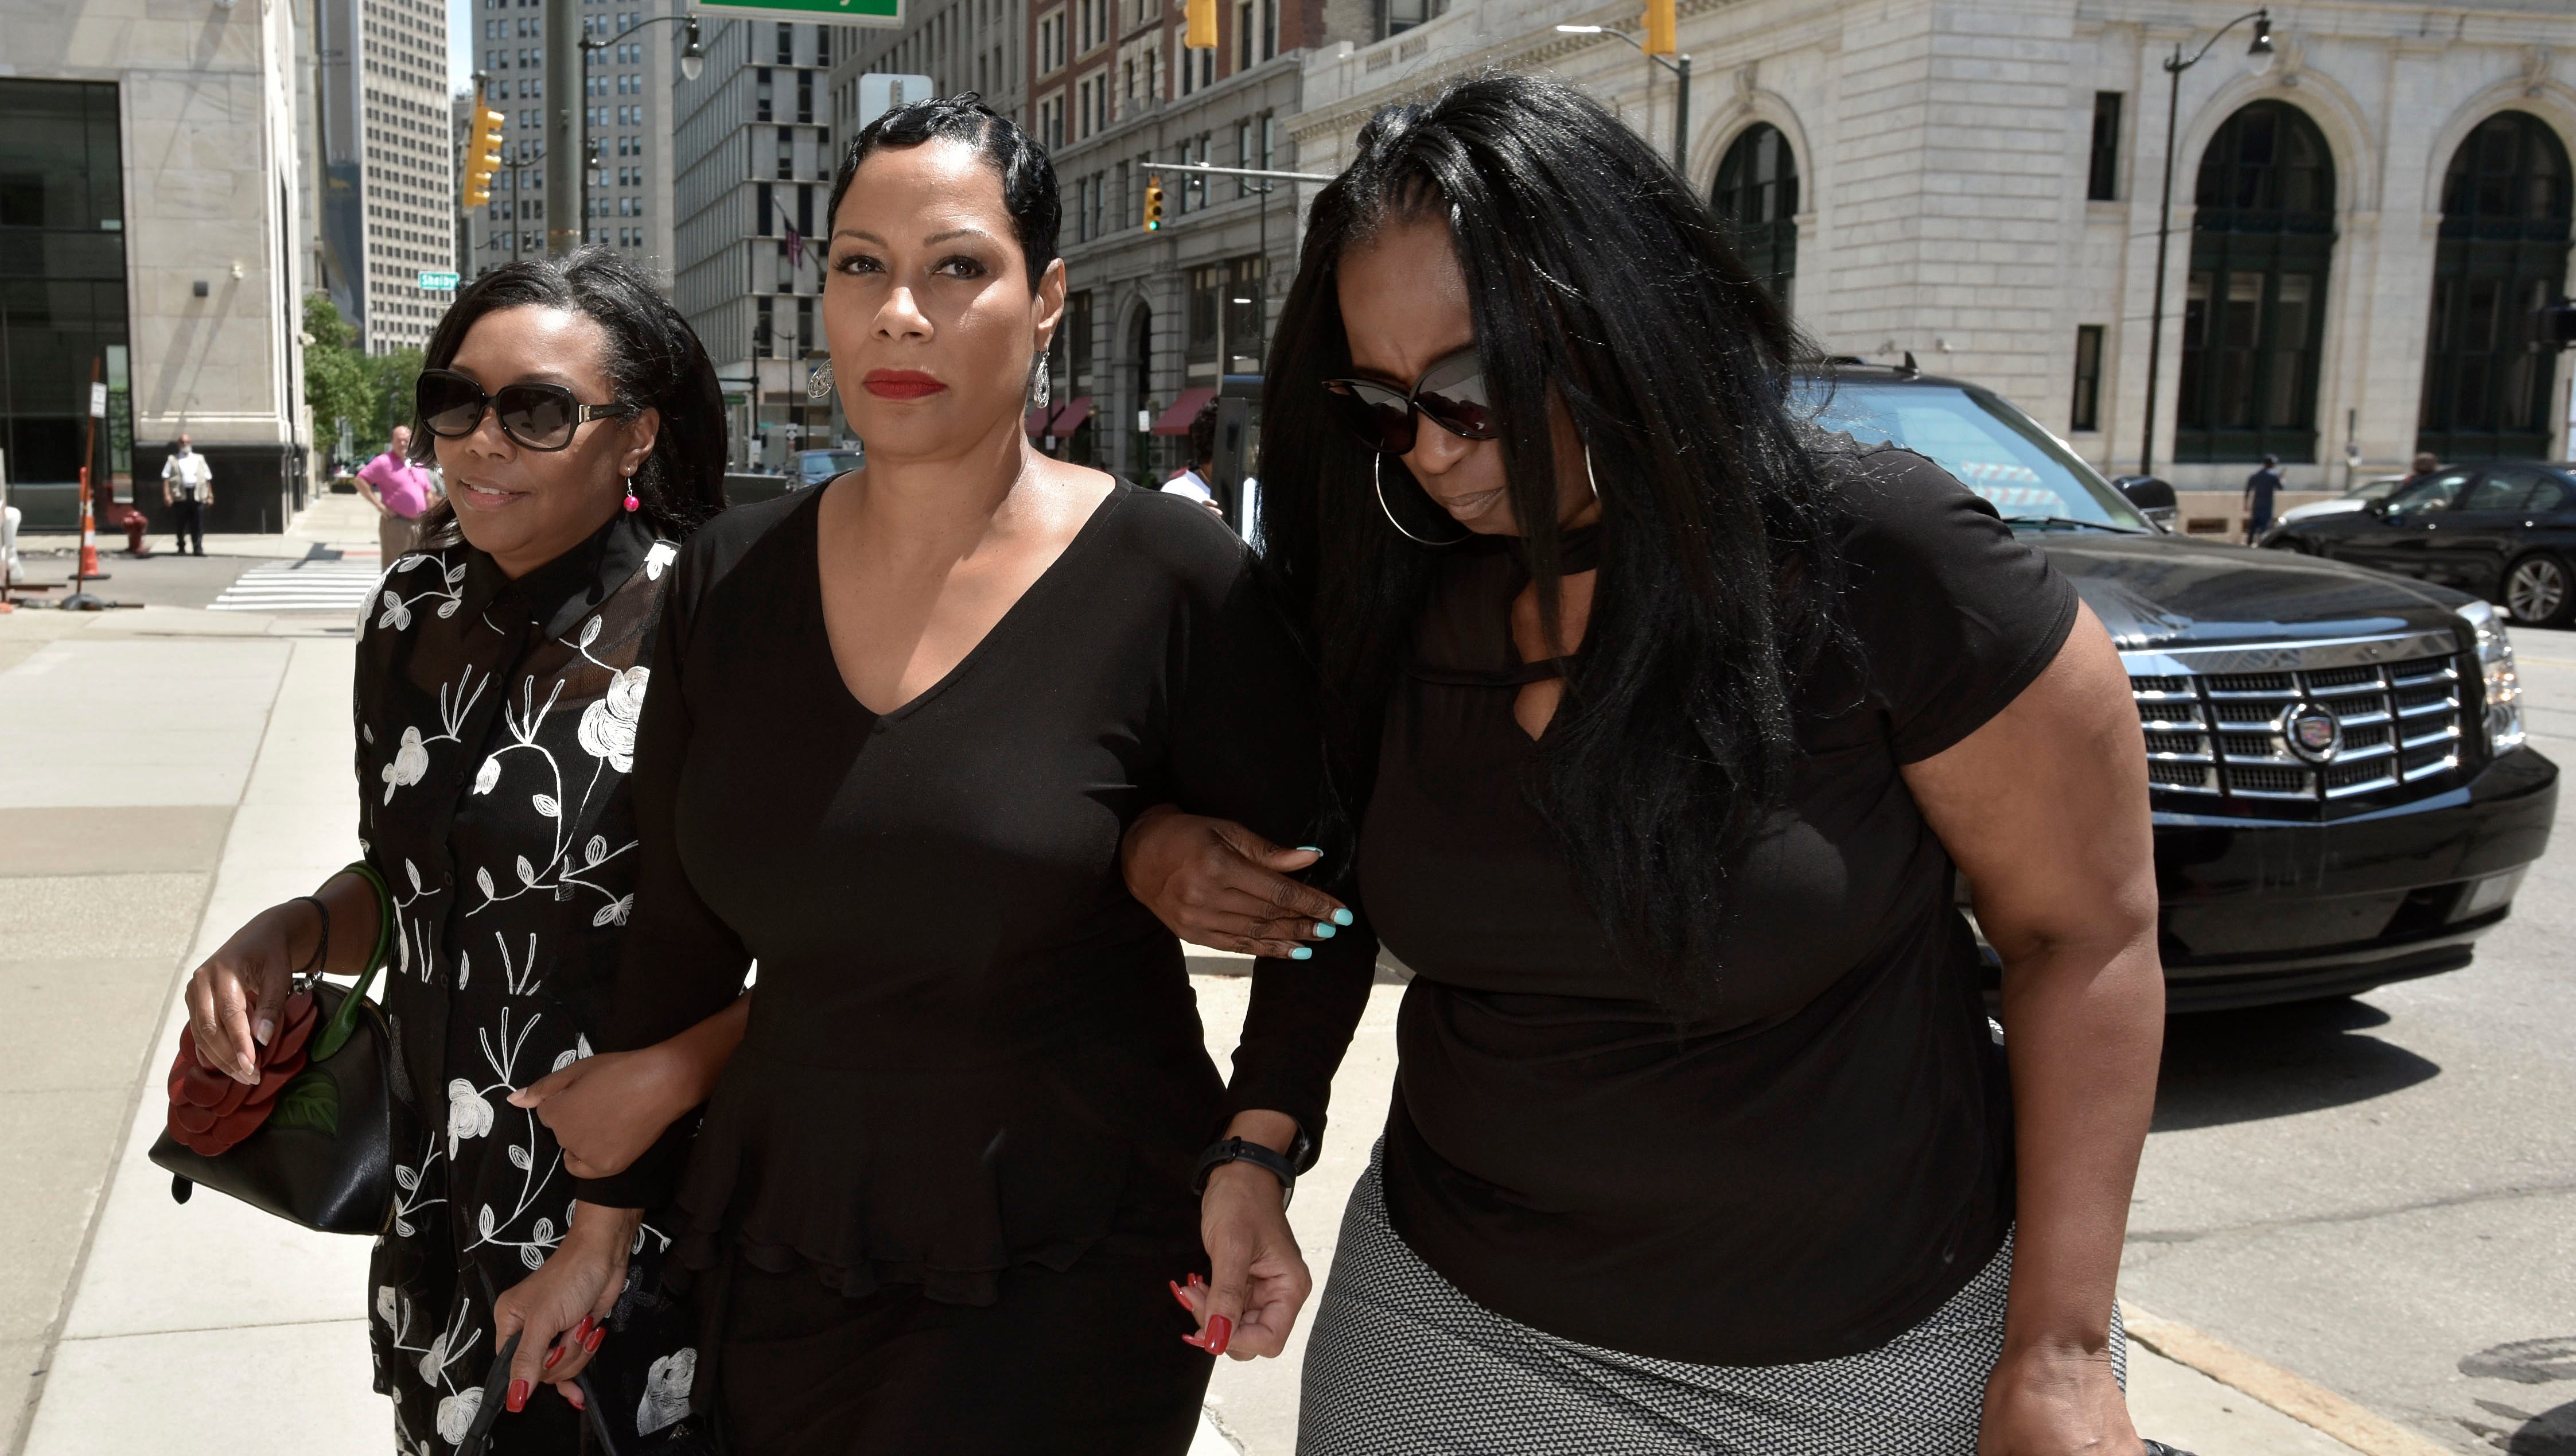 Monica Morgan-Holiefield, center, is escorted by two unidentified women as she enters the federal courthouse in downtown Detroit Friday  for her sentencing hearing.